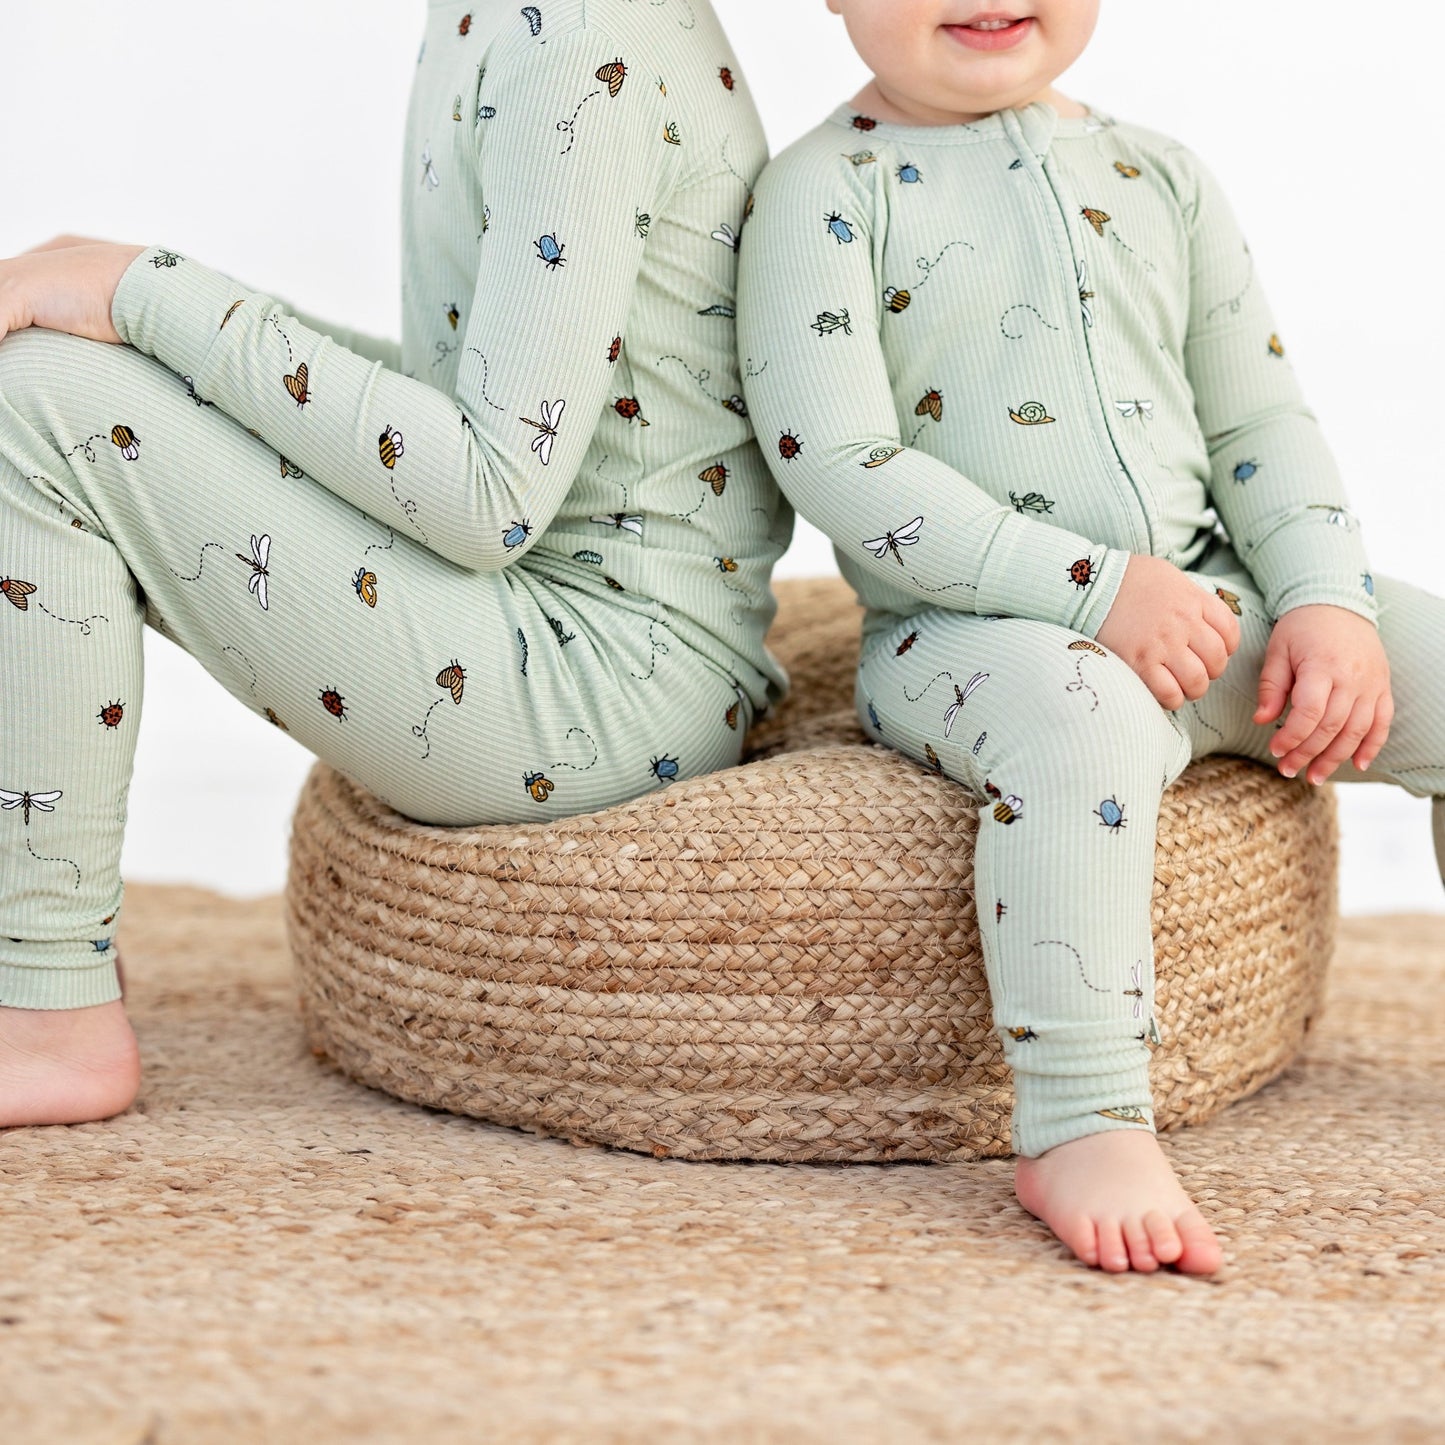 Bugs Two-Piece Set